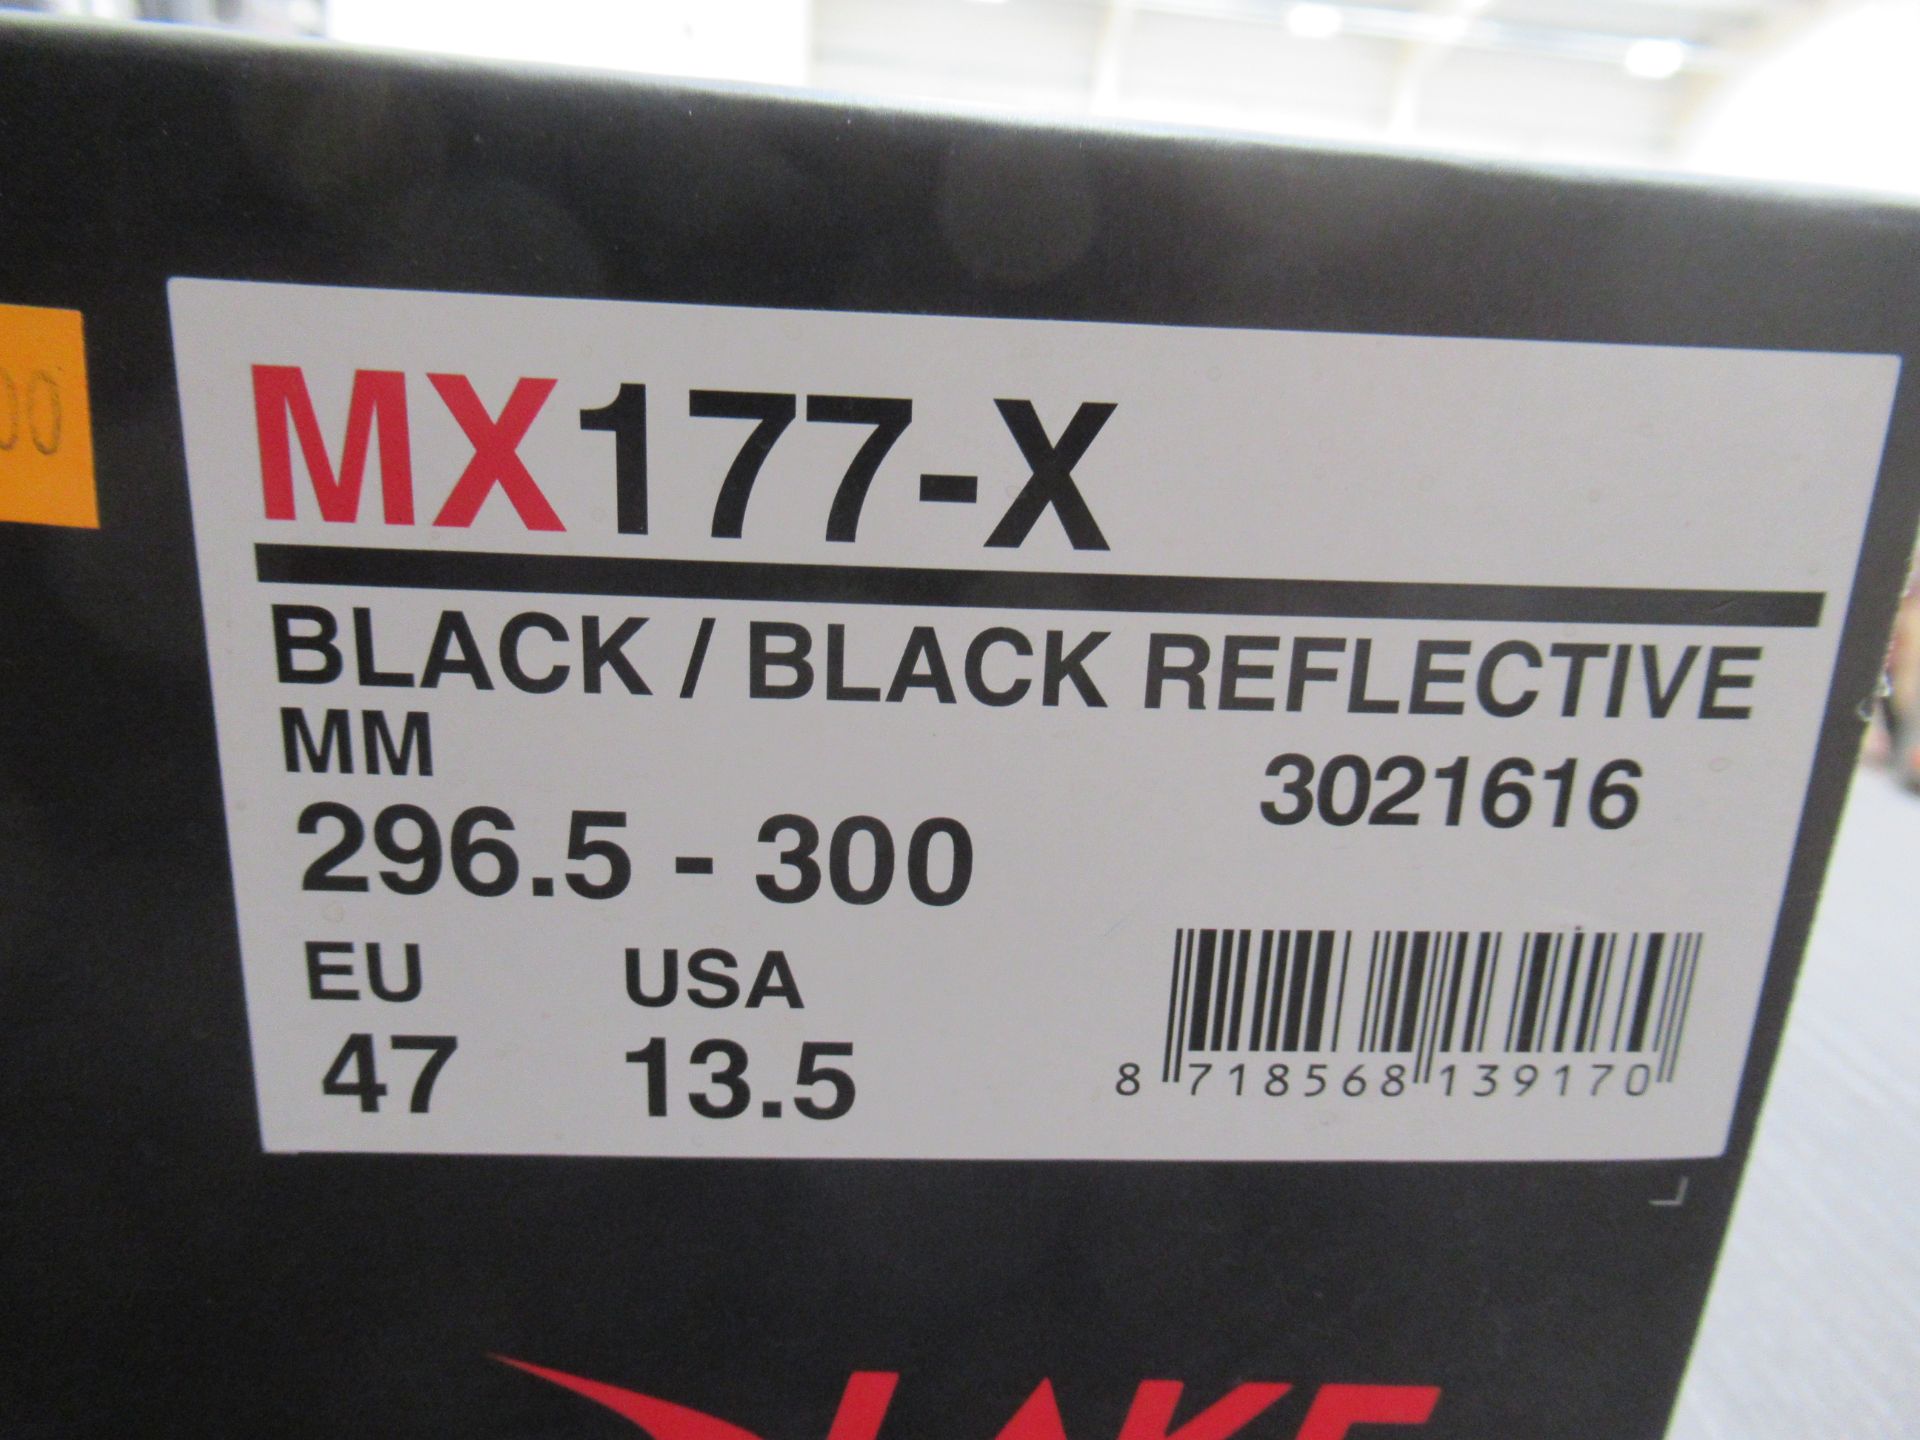 Pair of Lake MX177-X cycling shoes (black/black reflective) - boxed EU size 47 - (RRP£150) - Image 3 of 4